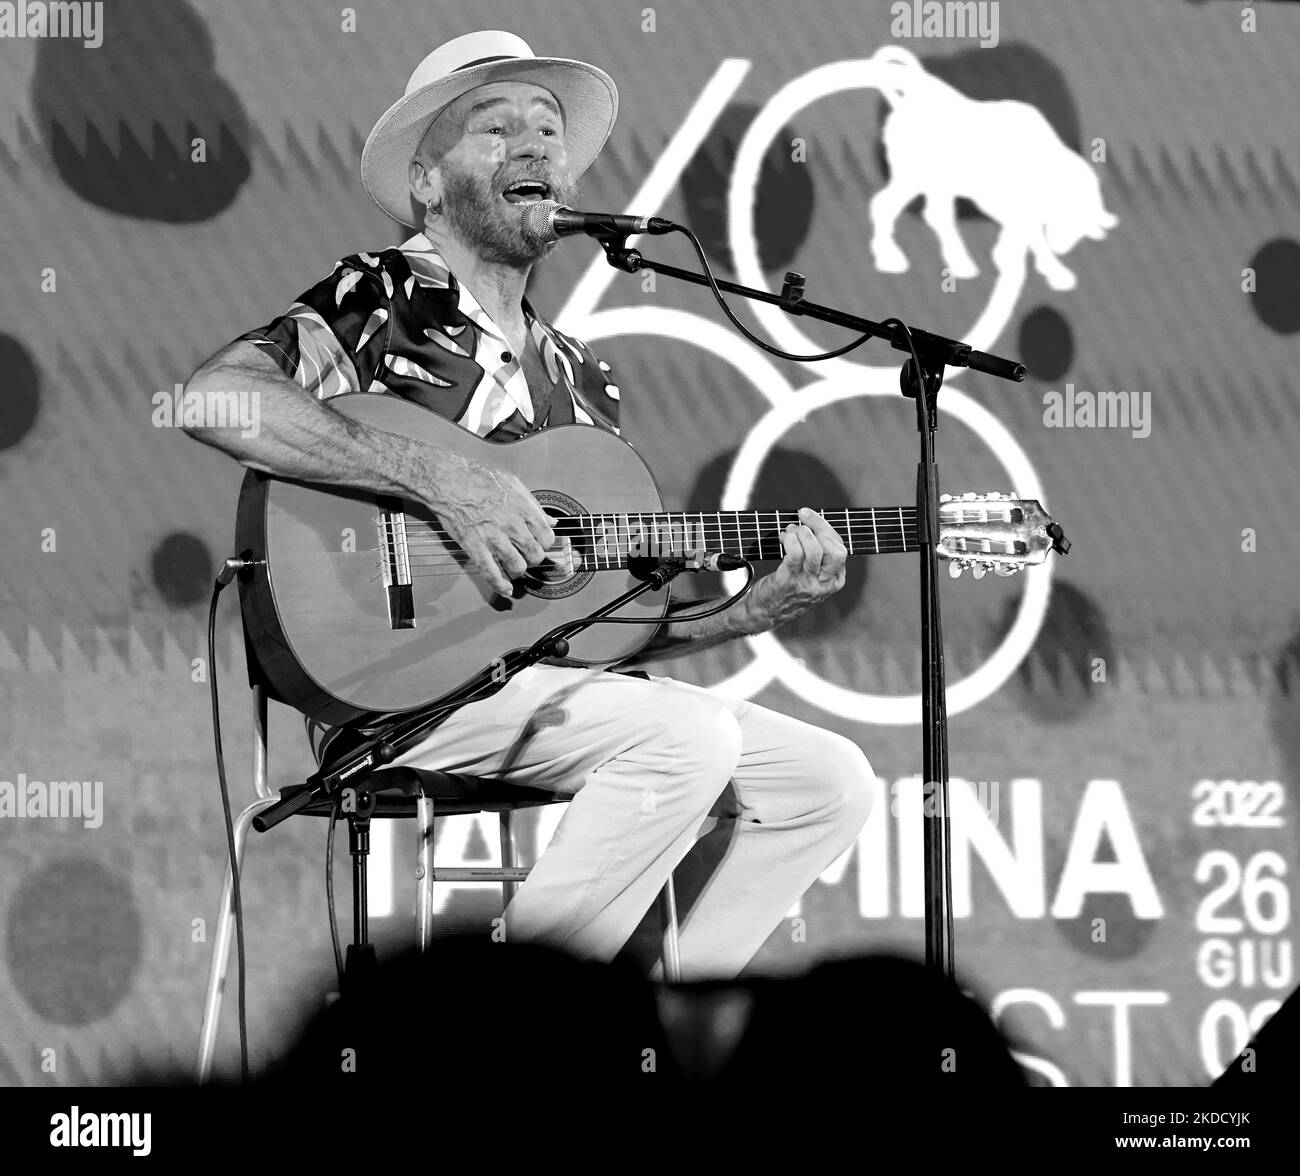 Mario Venuti sing on the stage of the ancient theater for the third evening of the film festival. 68th Taorminafilmfest, Taormina (ME), Italy - June 28, 2022 (Photo by Gabriele Maricchiolo/NurPhoto) Stock Photo